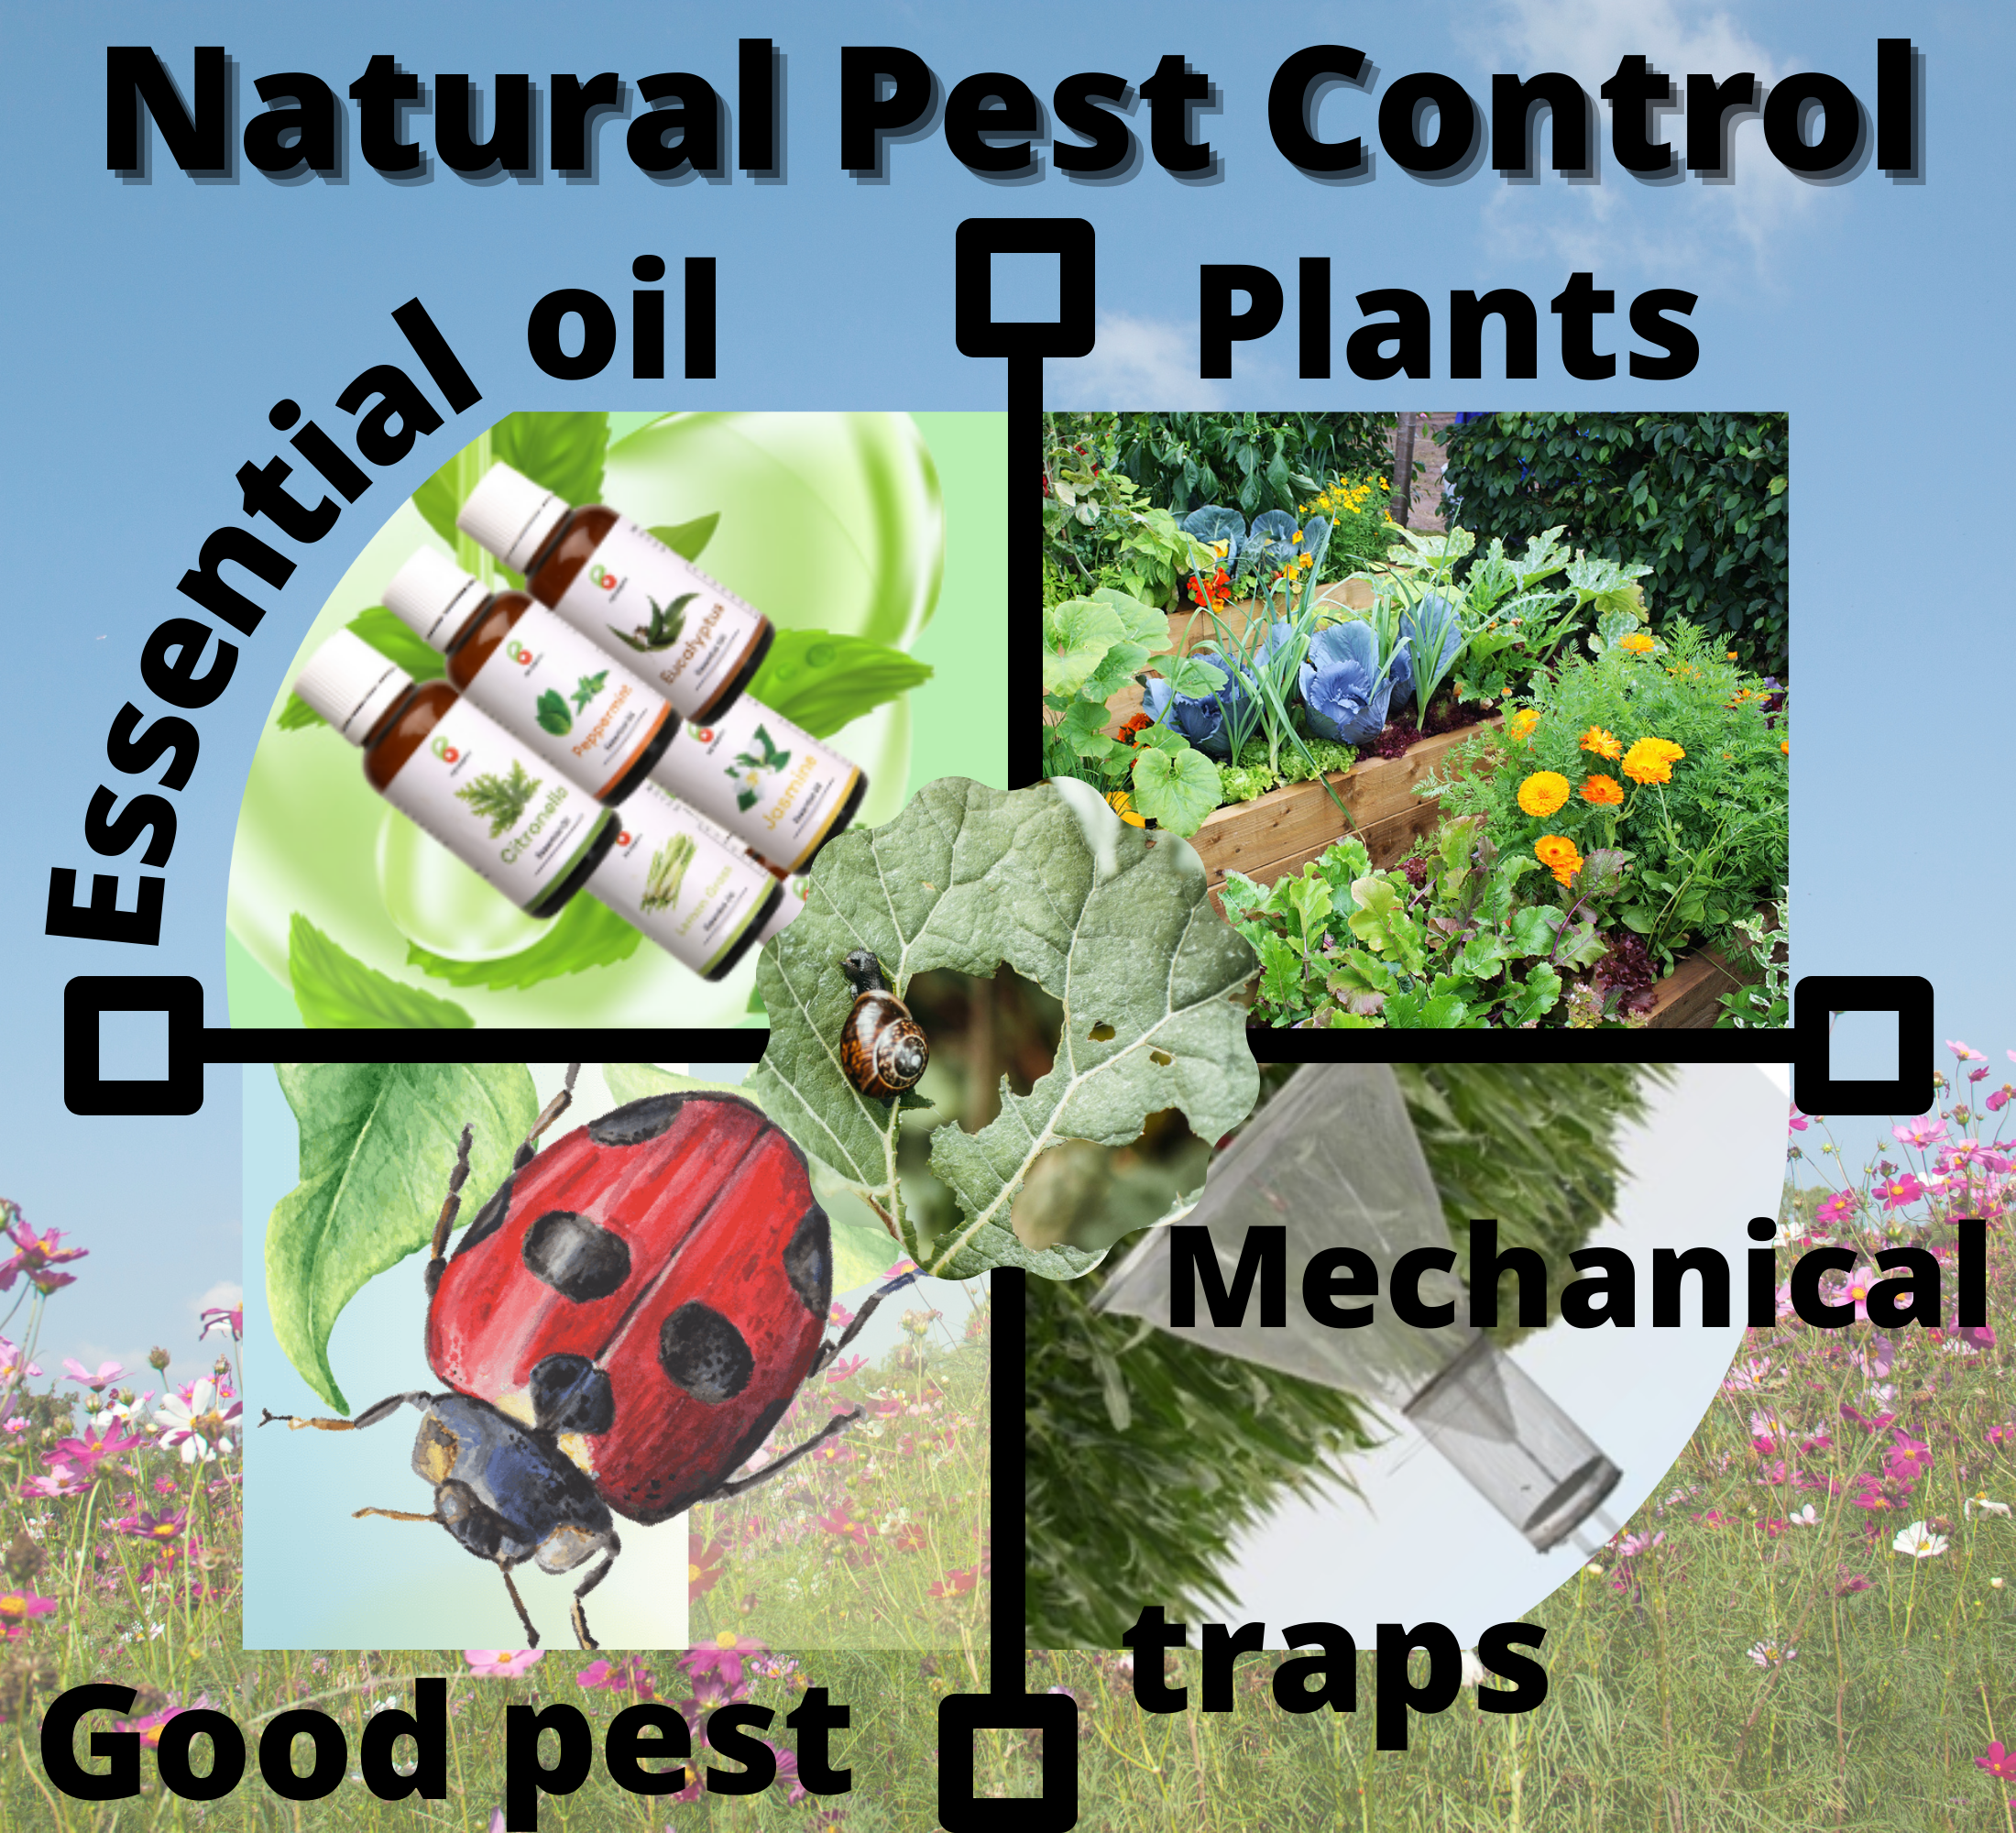 IV. Natural Pest Control Methods for Greenhouses